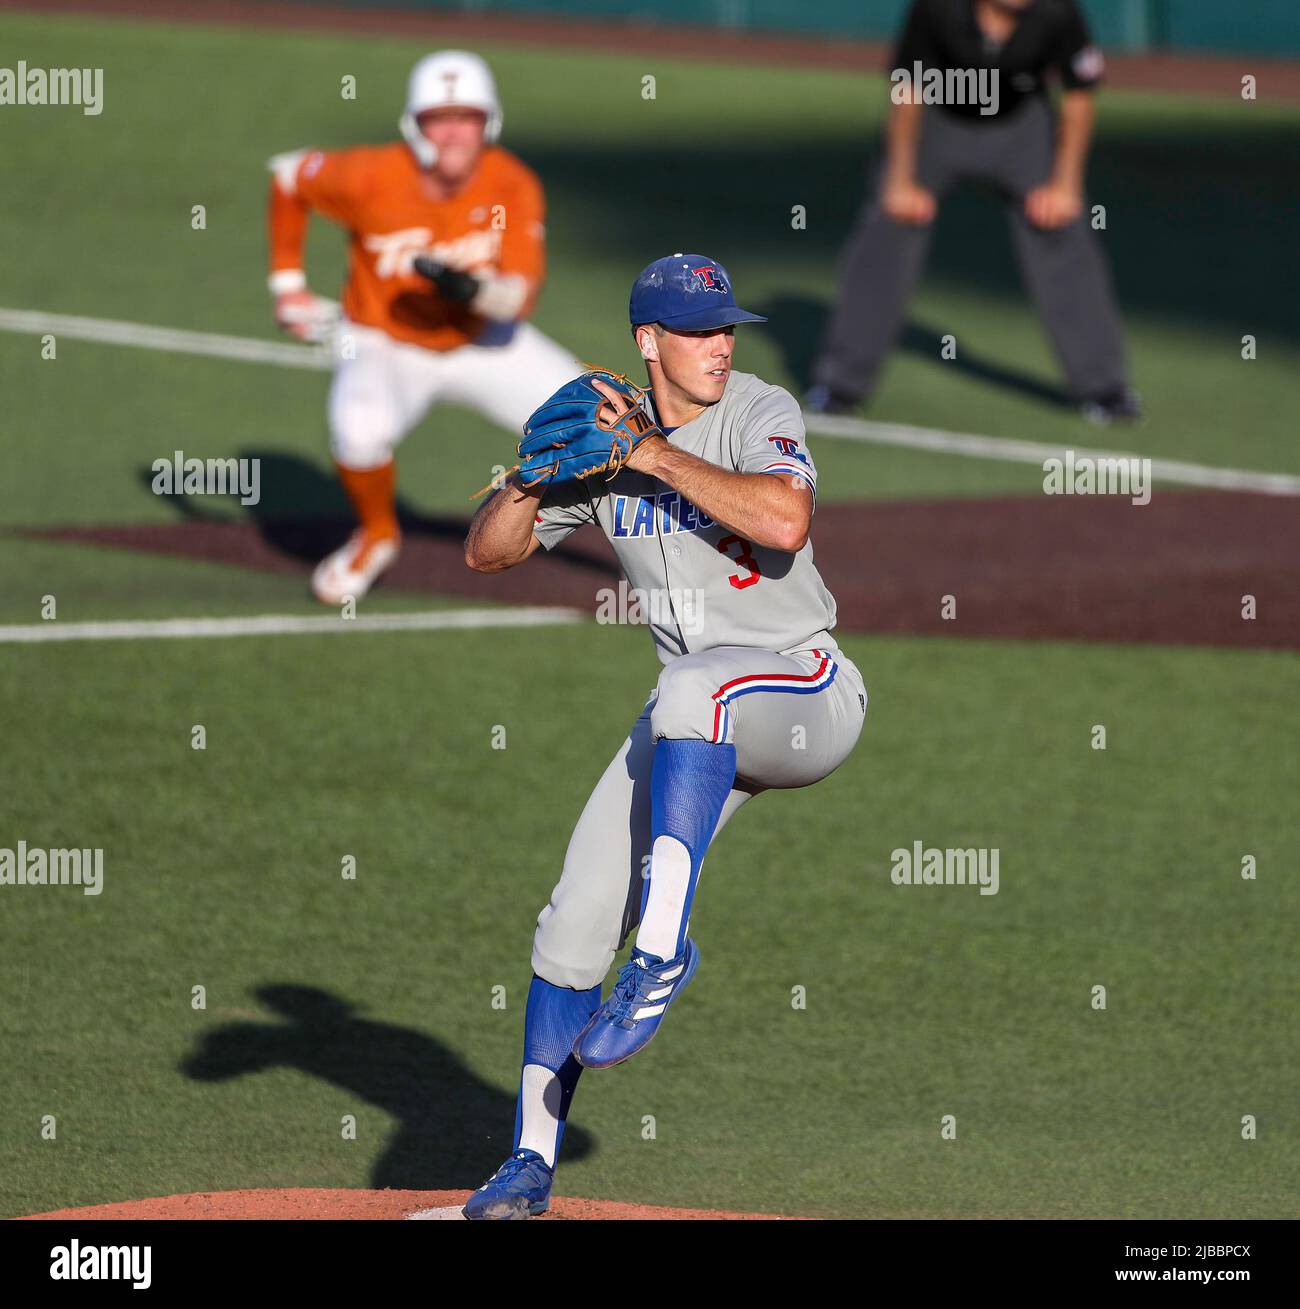 June 4, 2022: Austin, Texas, USA: Louisiana Tech starting pitcher Ryan Jennings (3) delivers a pitch as Texas outfielder Eric Kennedy (30) takes a lead off first base during an NCAA playoff baseball game on June 4, 2022 in Austin, Texas. (Credit Image: © Scott Coleman/ZUMA Press Wire) Stock Photo